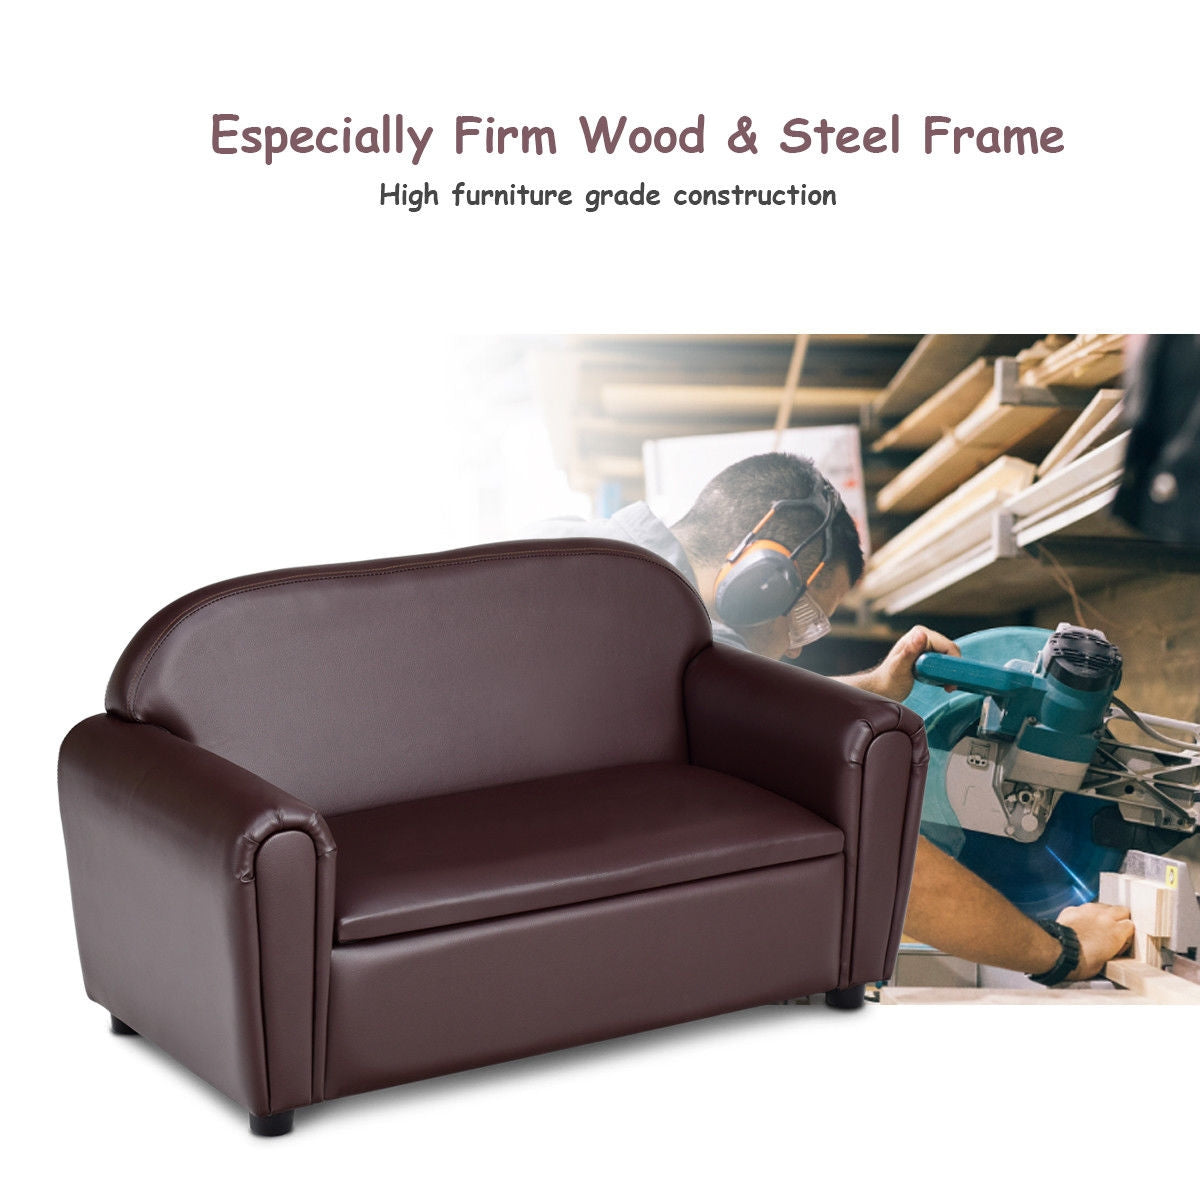 Sturdy, Stable, and Comfortable: Constructed with a solid wood frame, this sofa ensures durability for your kids. The sturdy non-slip feet enhance stability and security. The high-density sponge seat offers your kids a cozy seating experience.